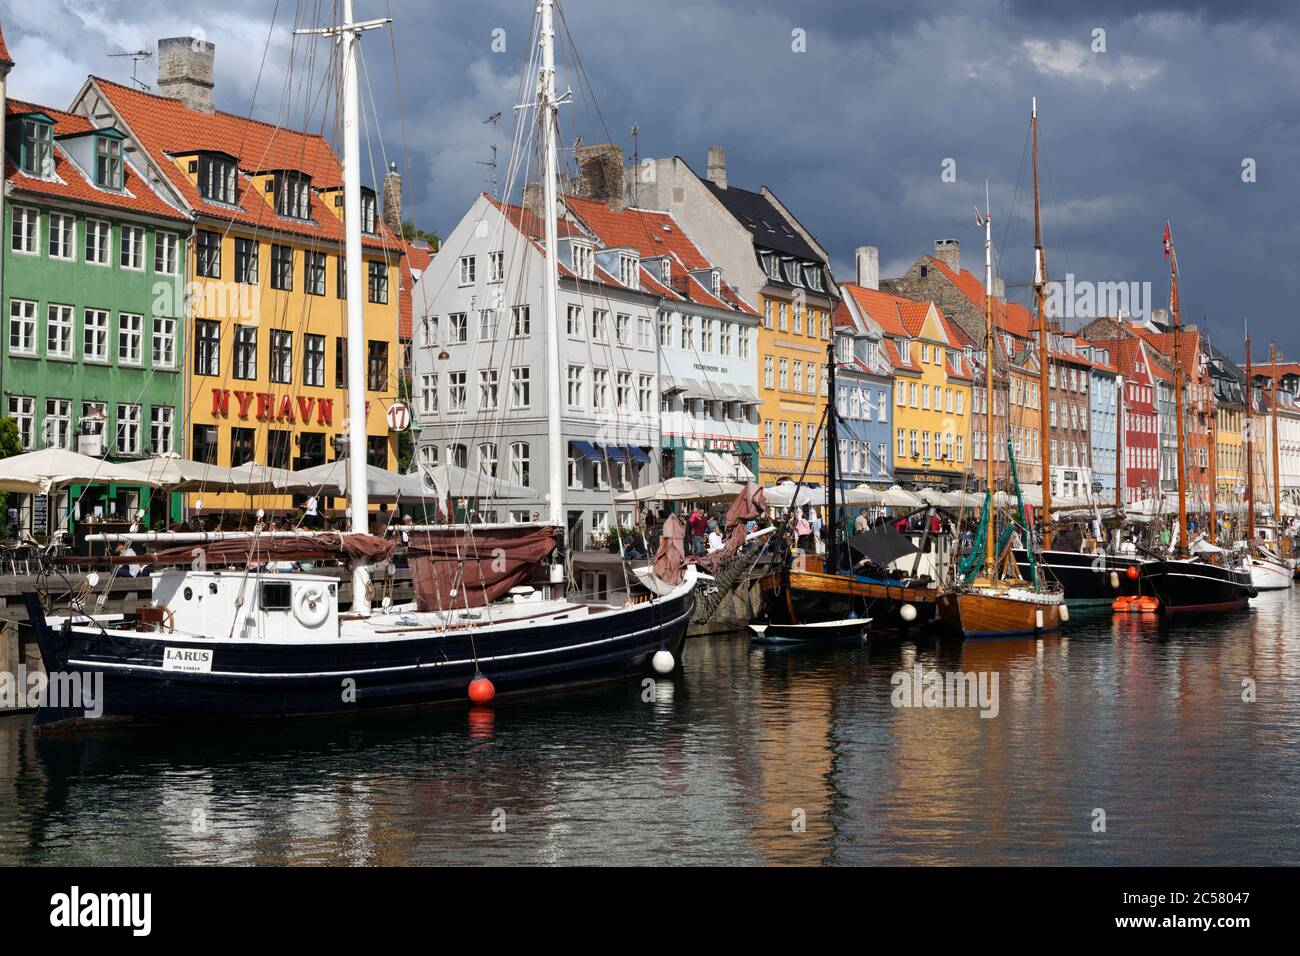 View along Nyhavn (New Harbour) canal lined with boats and former merchant's houses Stock Photo